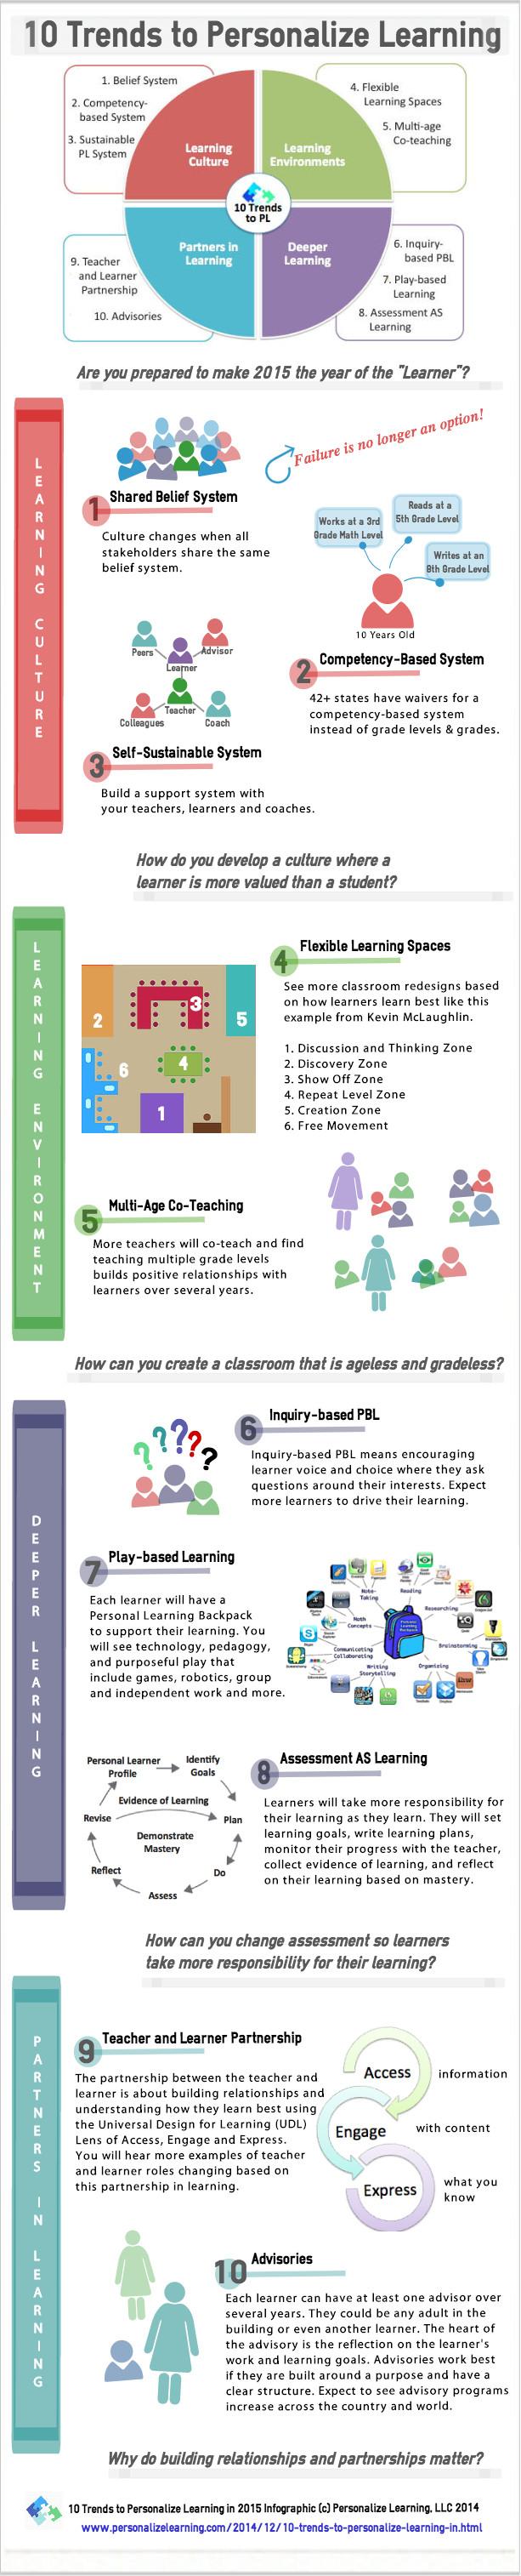 ten-trends-to-personalize-learning-in-2015-infographic